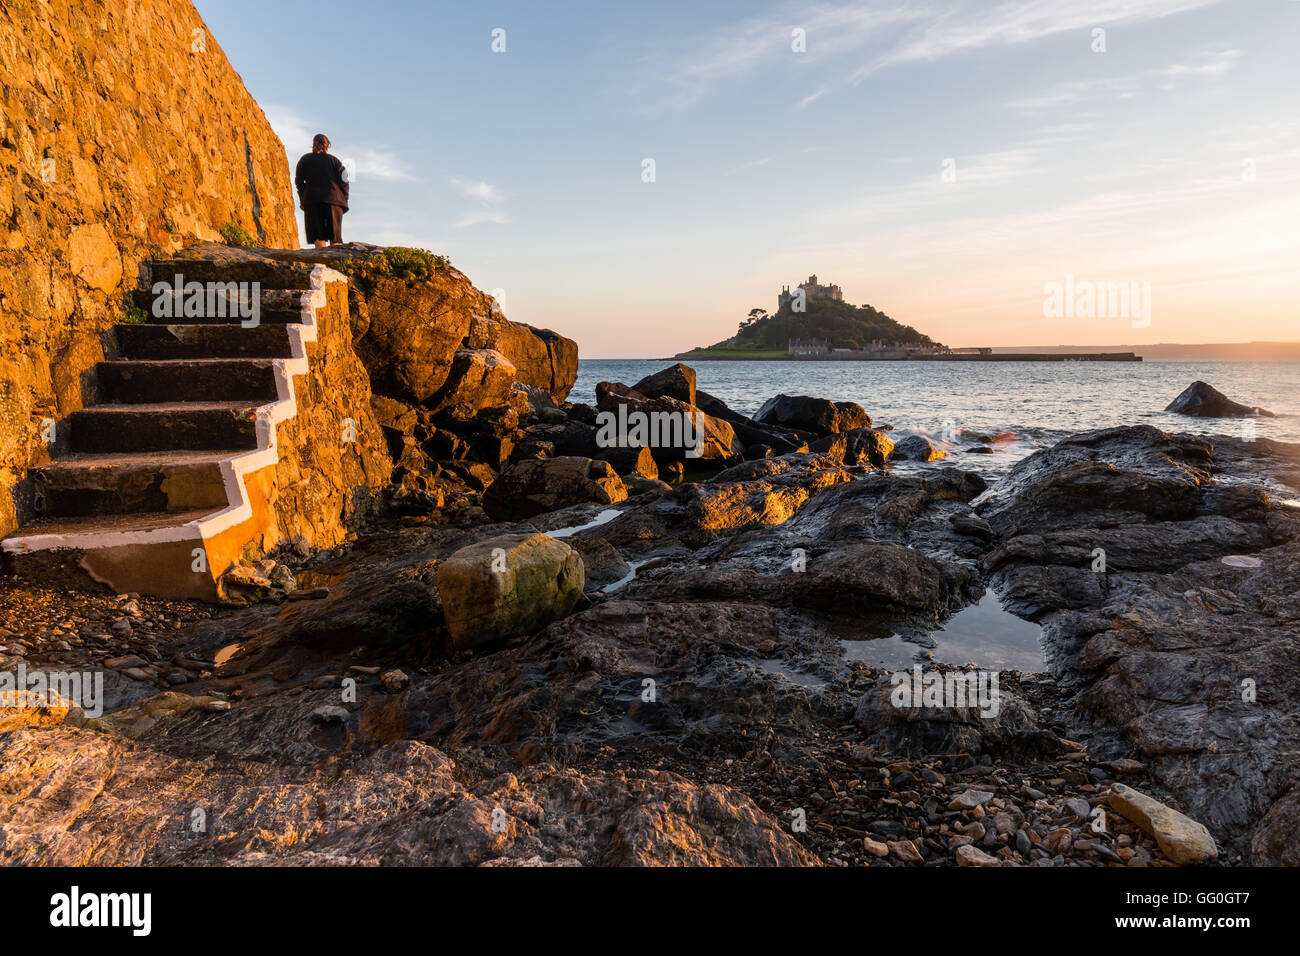 Lady stand on the shore to watch St Michael Mount Stock Photo